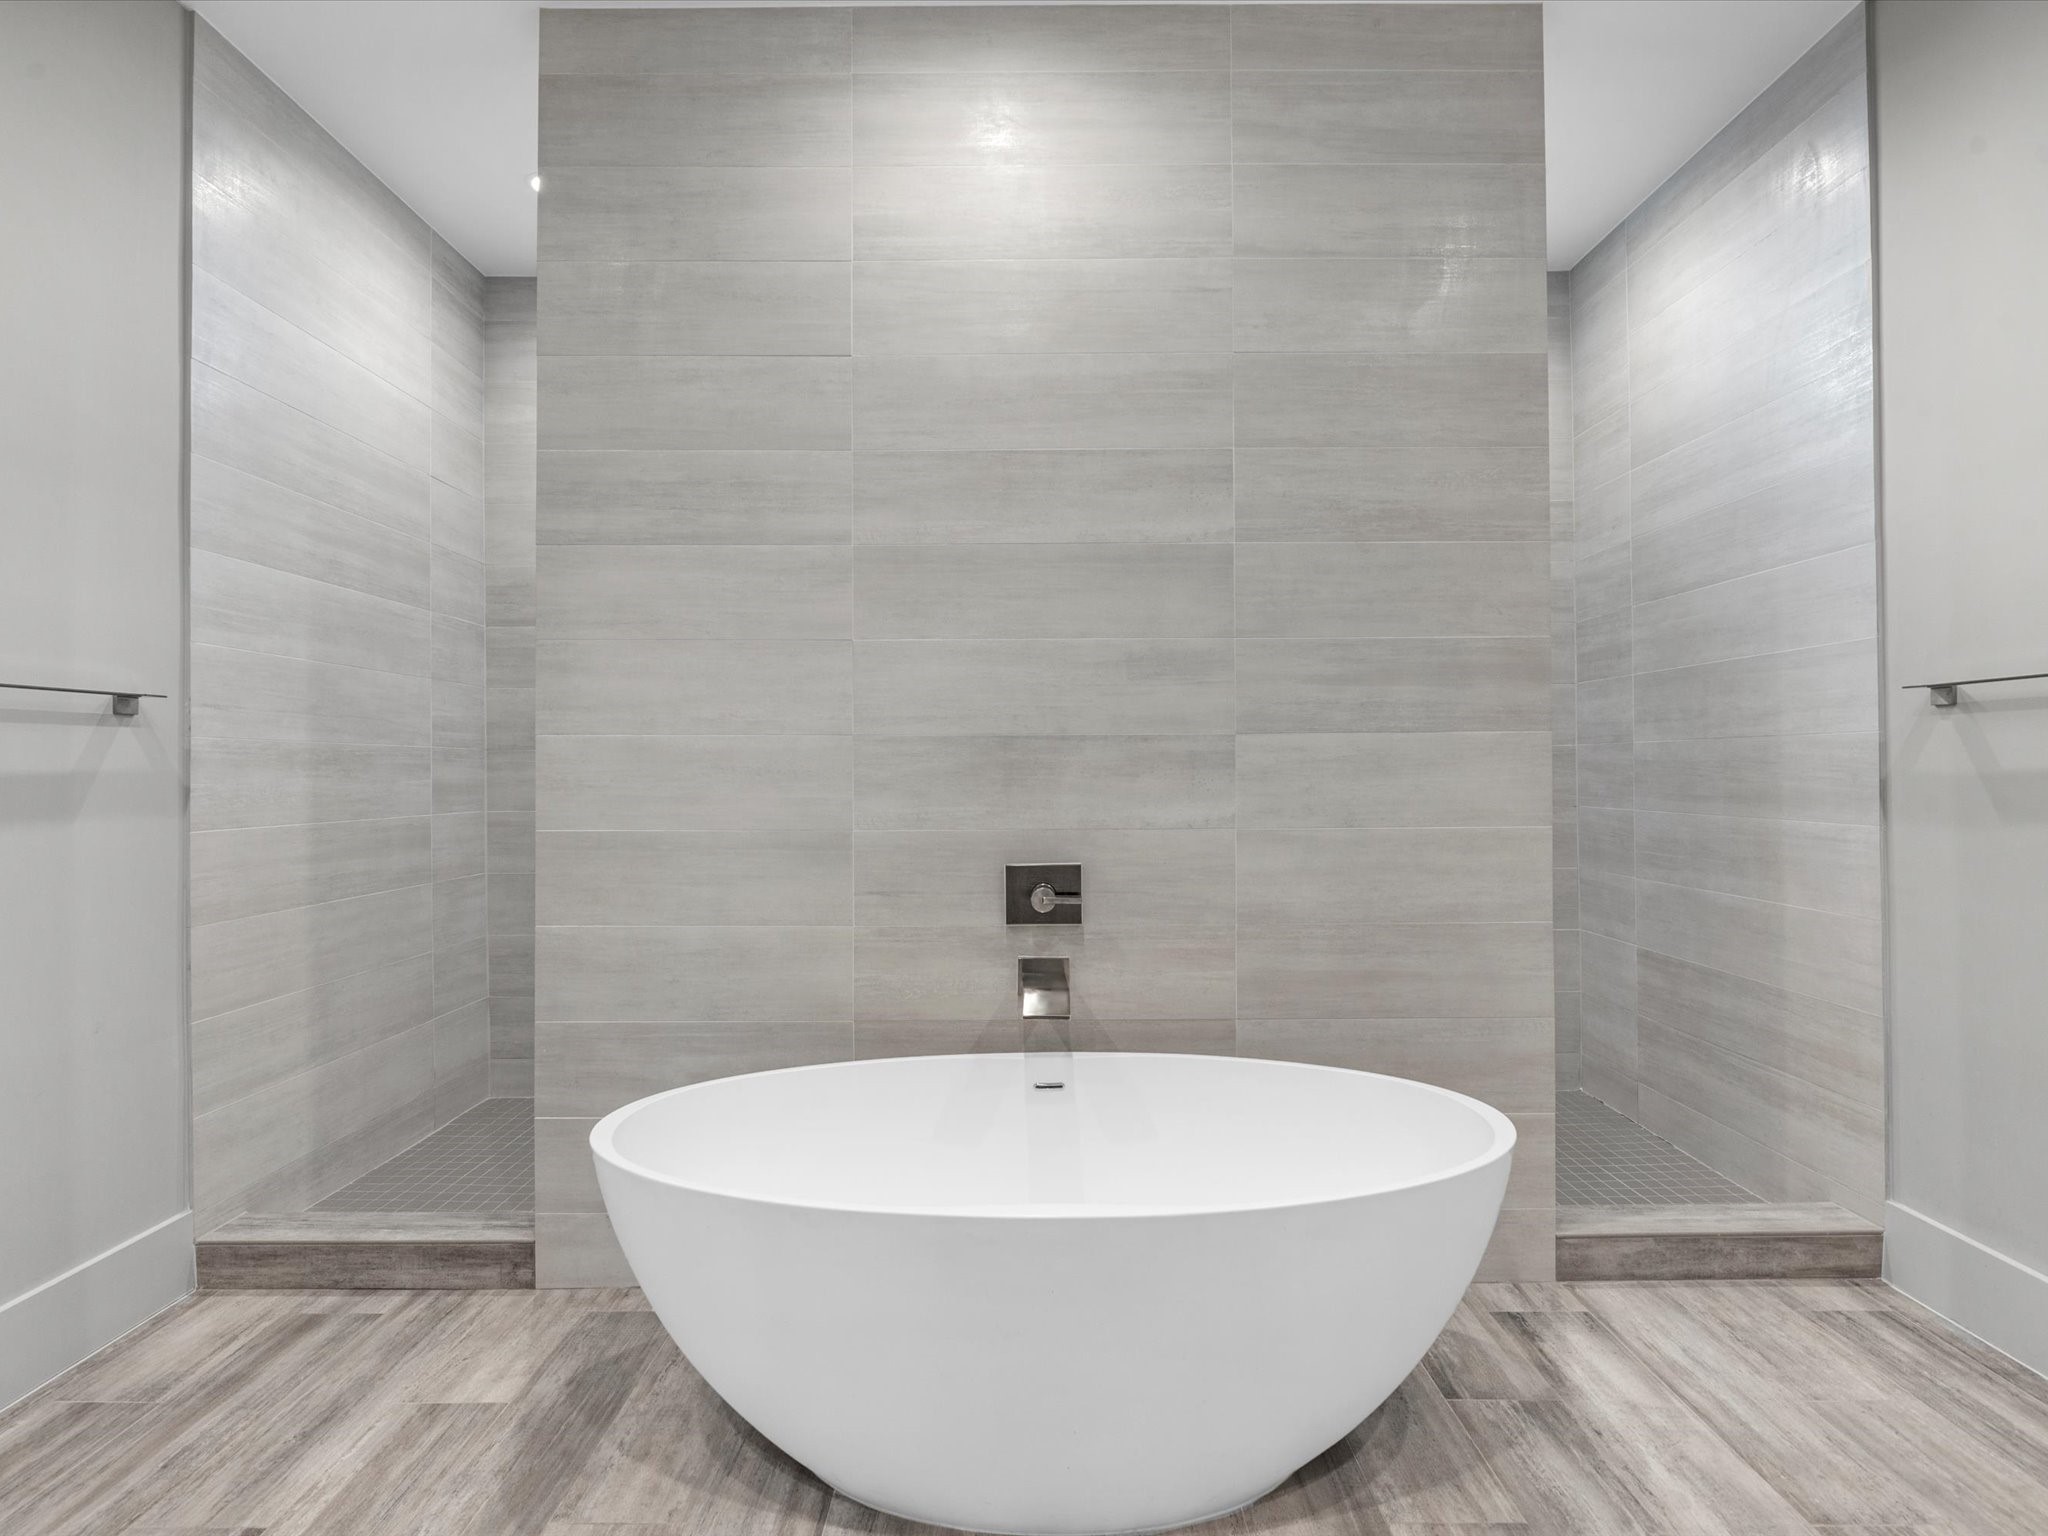 The primary bathroom features a freestanding tub and huge walk-in shower!